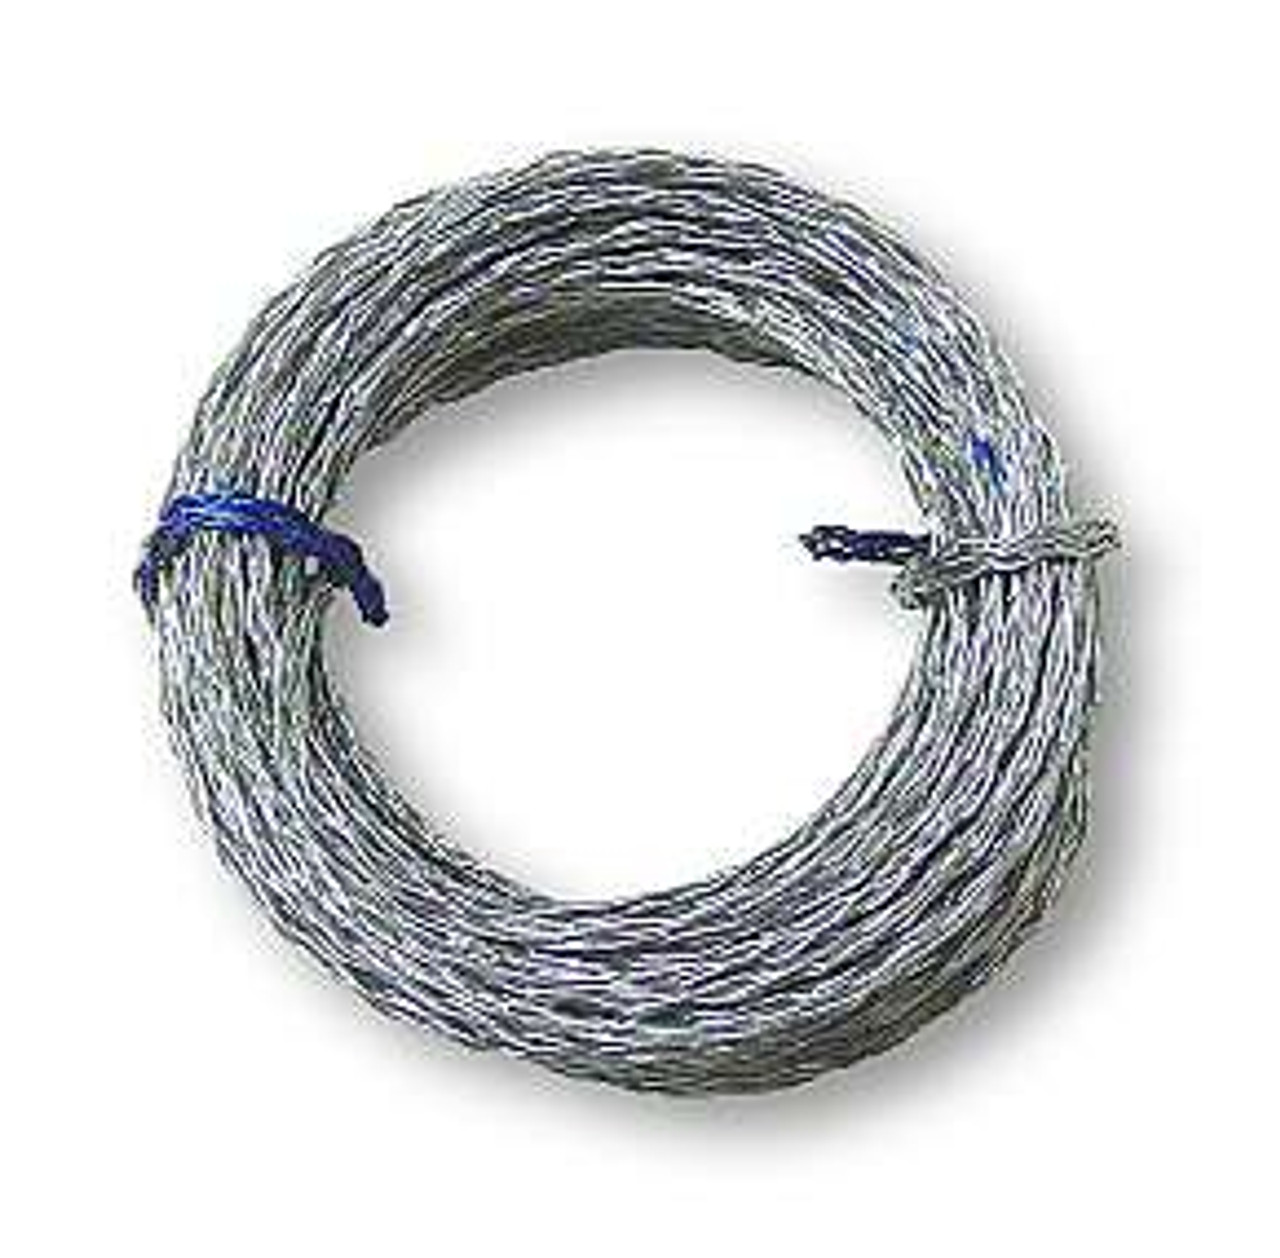 Bulldog Picture Wire 15 Lb 15 Feet Roll AM-235620 - D. Lawless